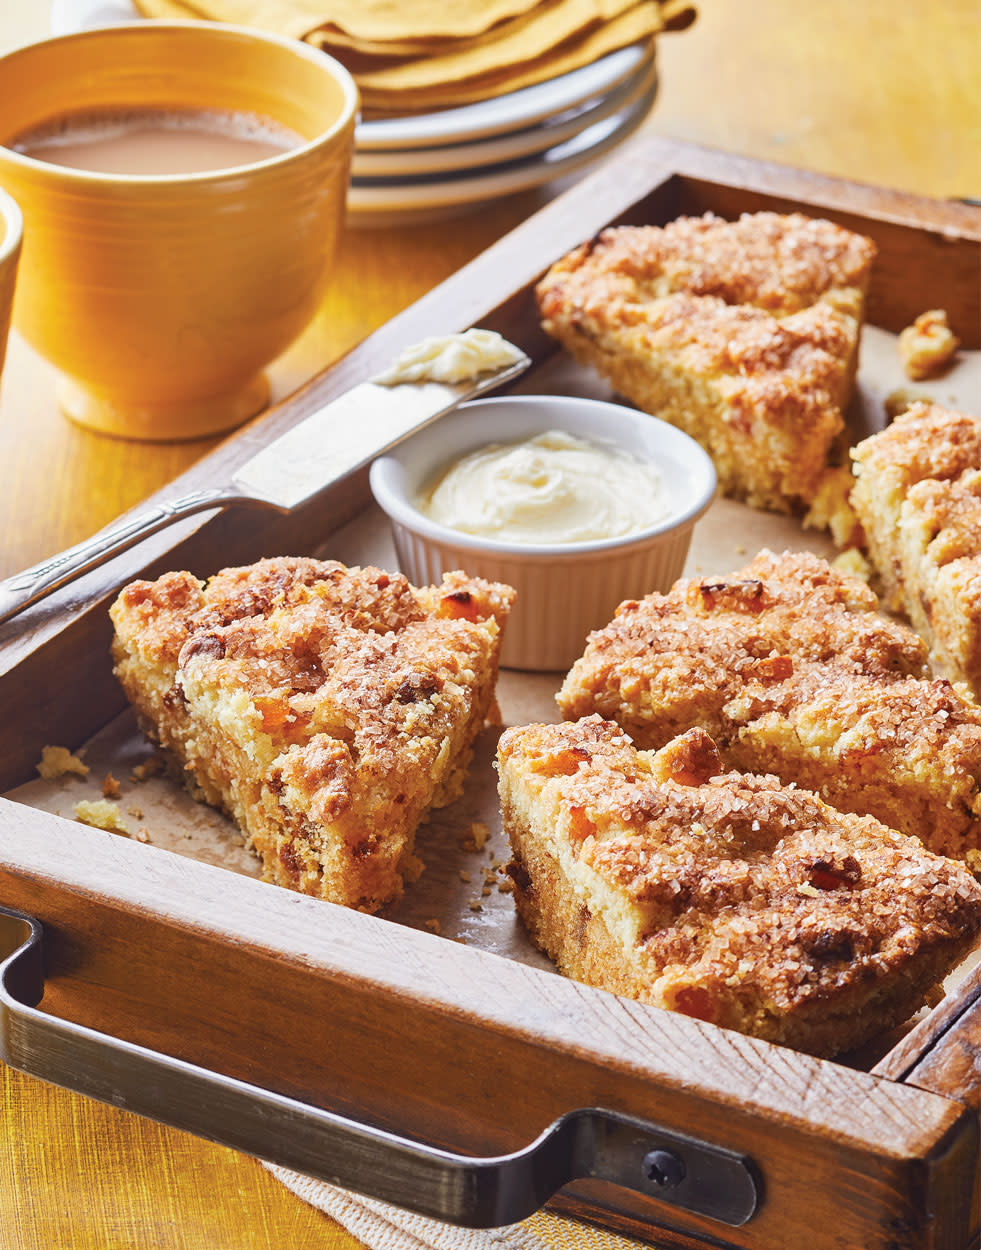 Apricot-Scones-with-Cinnamon-Chips-Lead